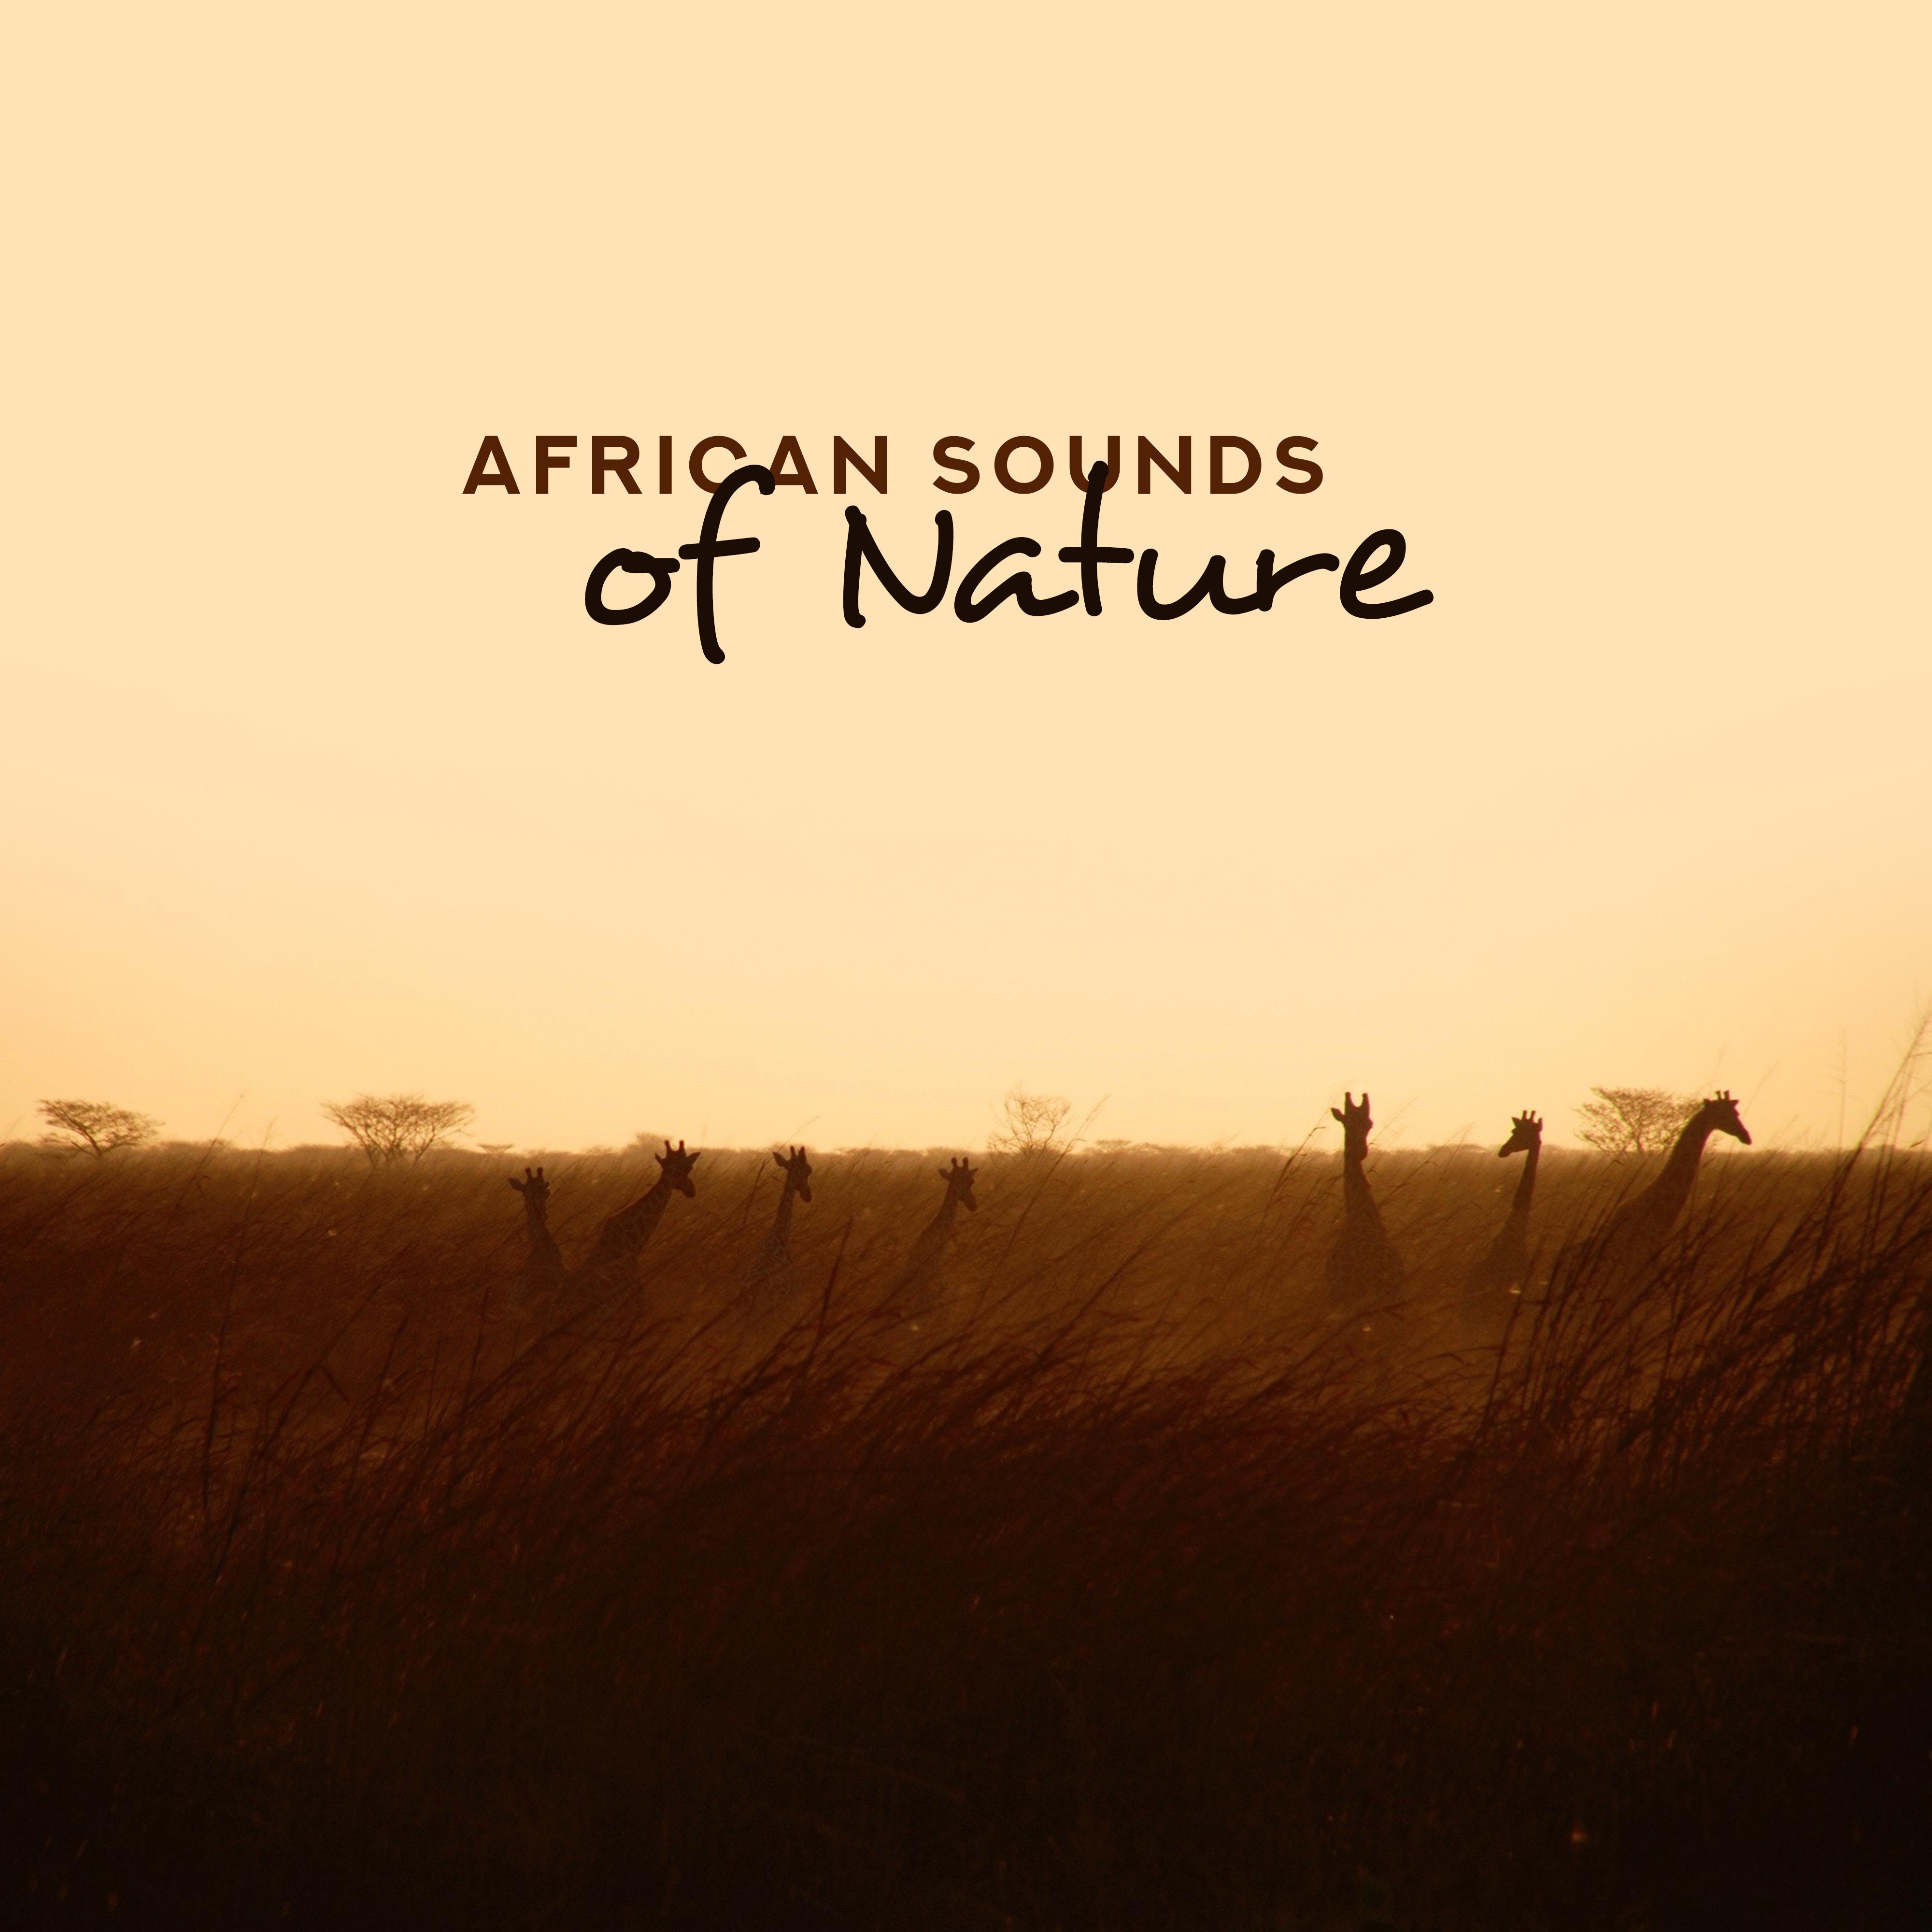 African Sounds of Nature: Ethnic Musical Compositions with Traditional African Drums and the Sounds of Nature